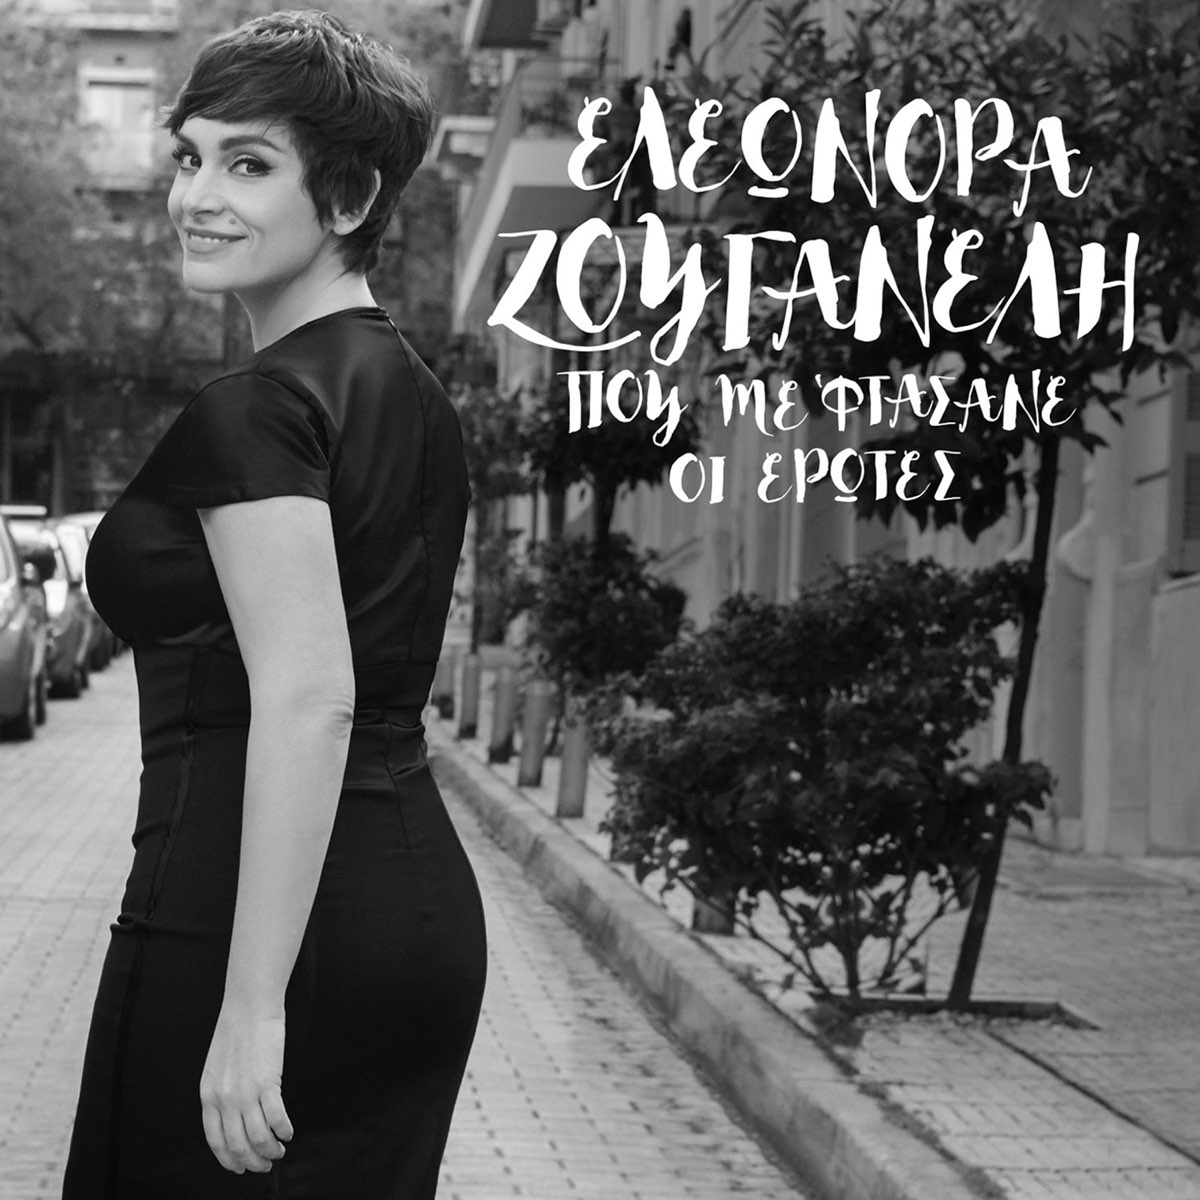 Zouganeli eleonora discography torrents lucy ann polk discography torrent